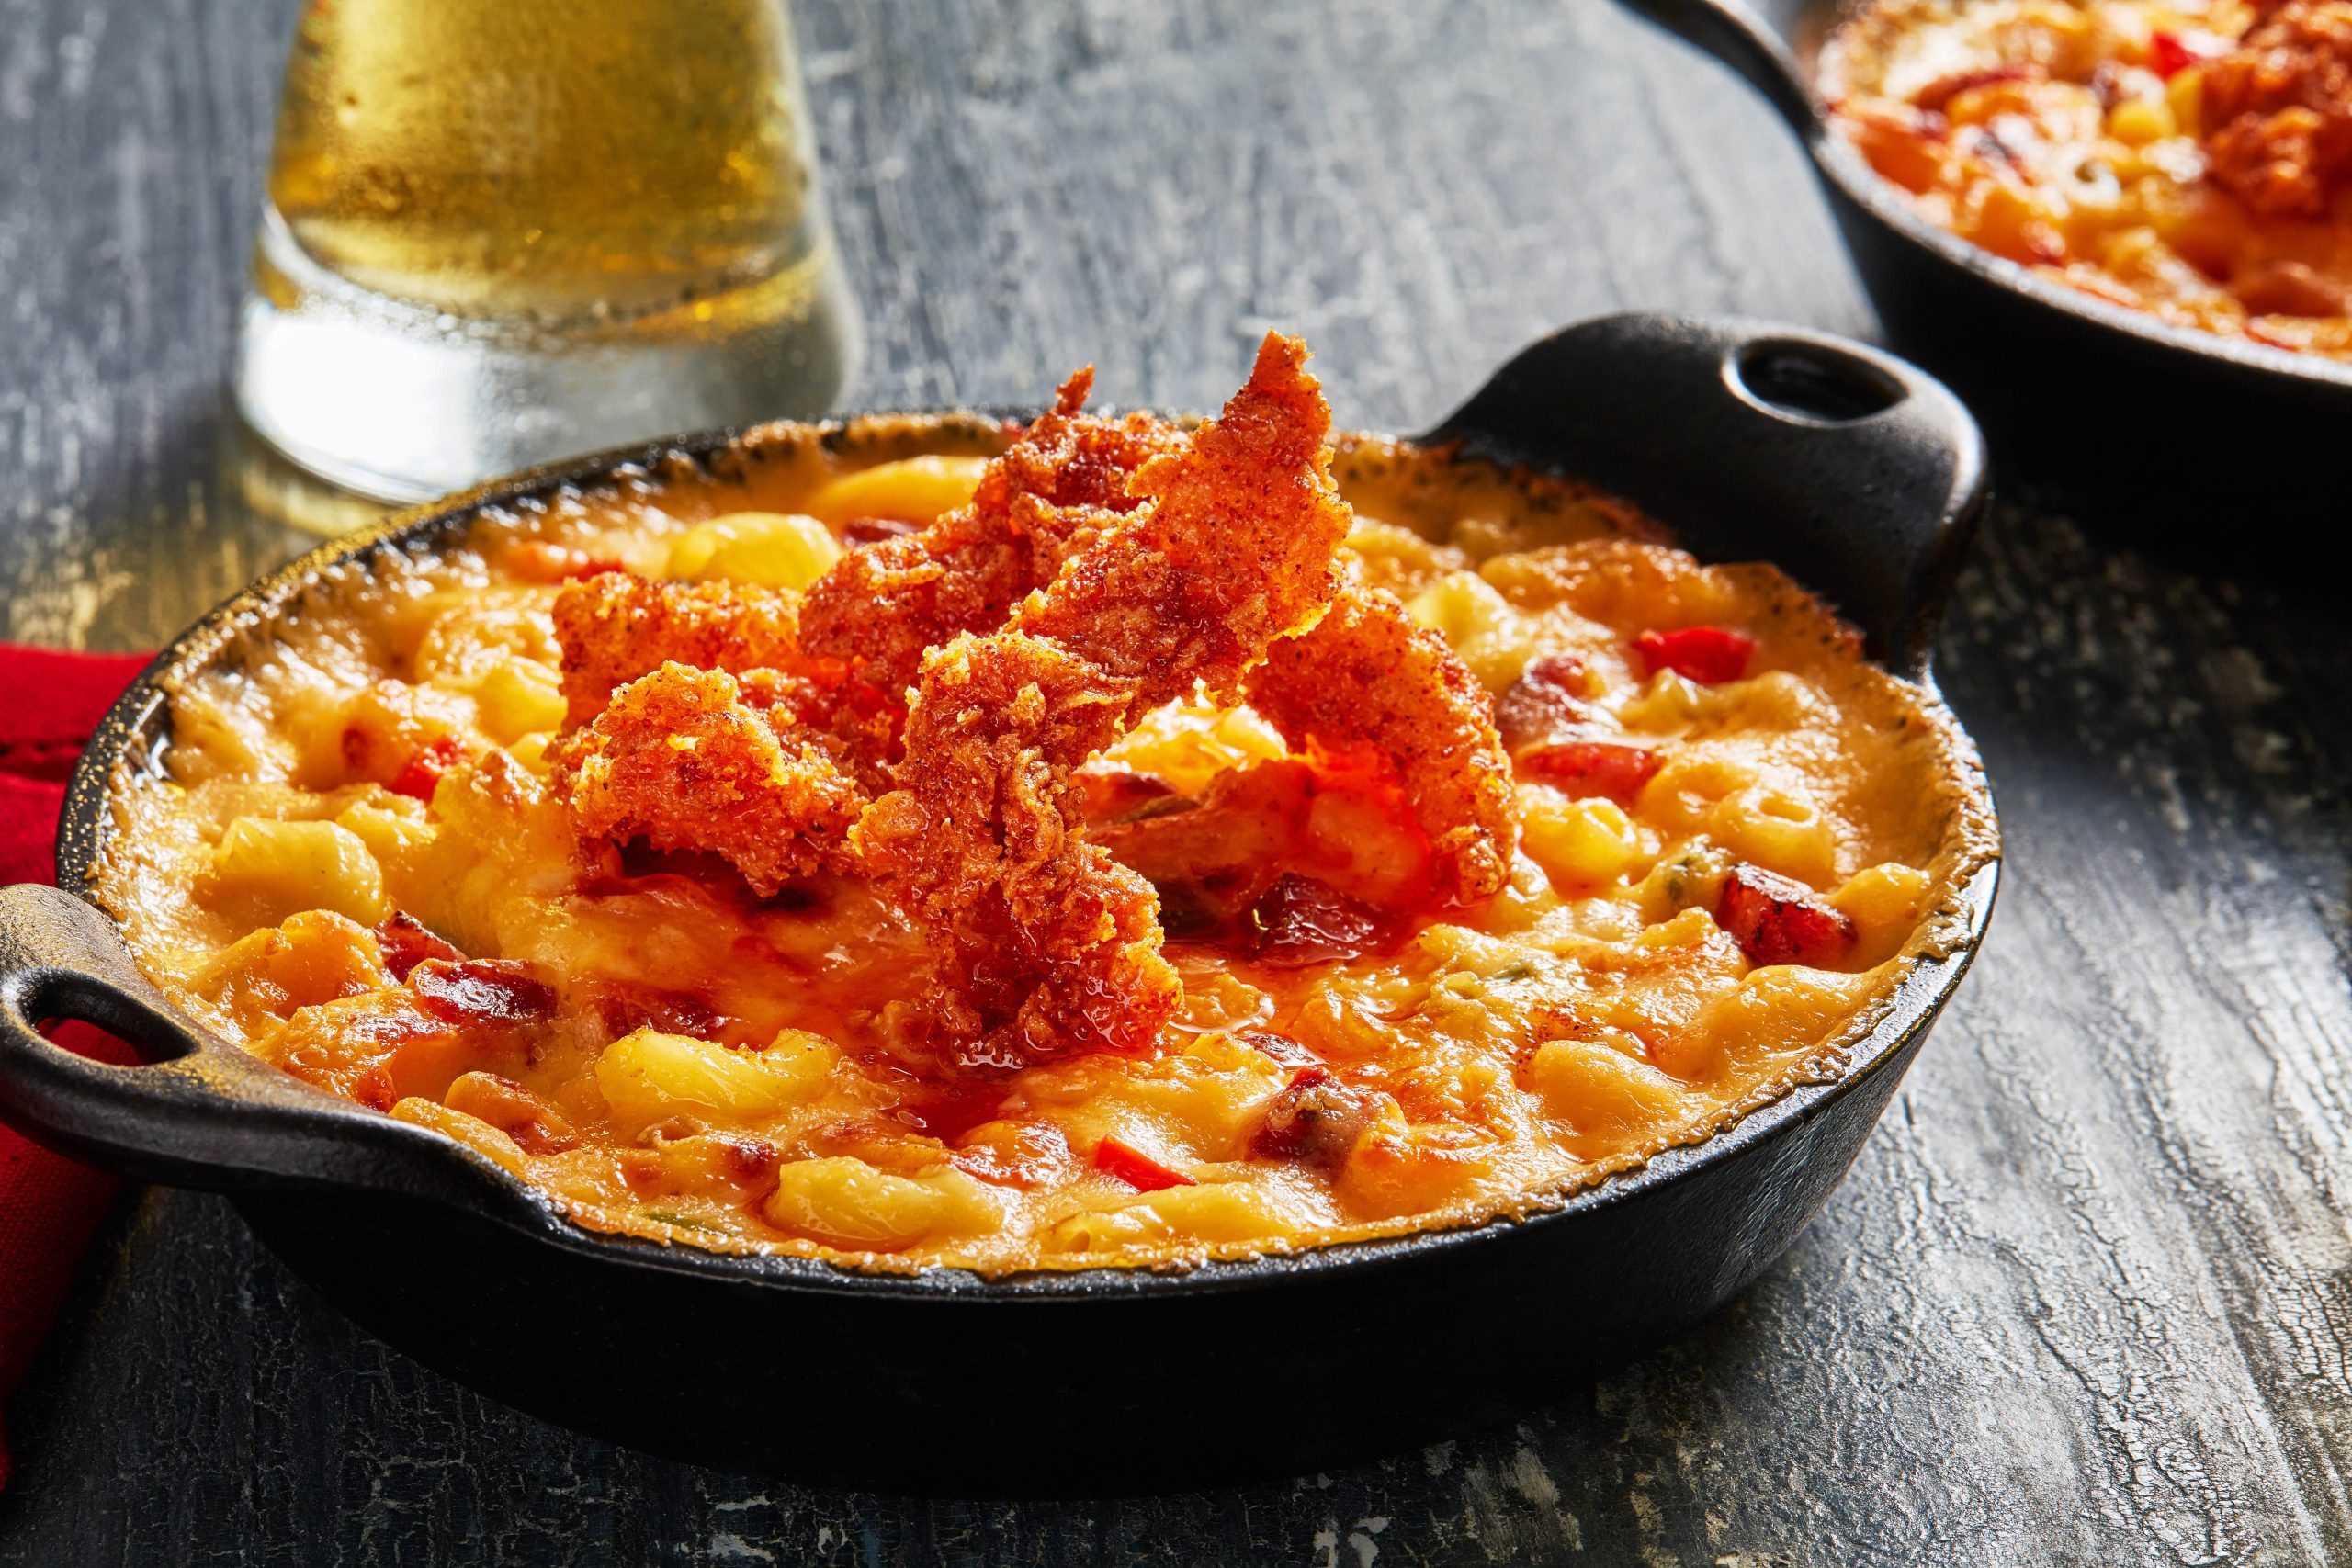 Cajun Mac and Cheese with Nashville Hot Chicken Skins